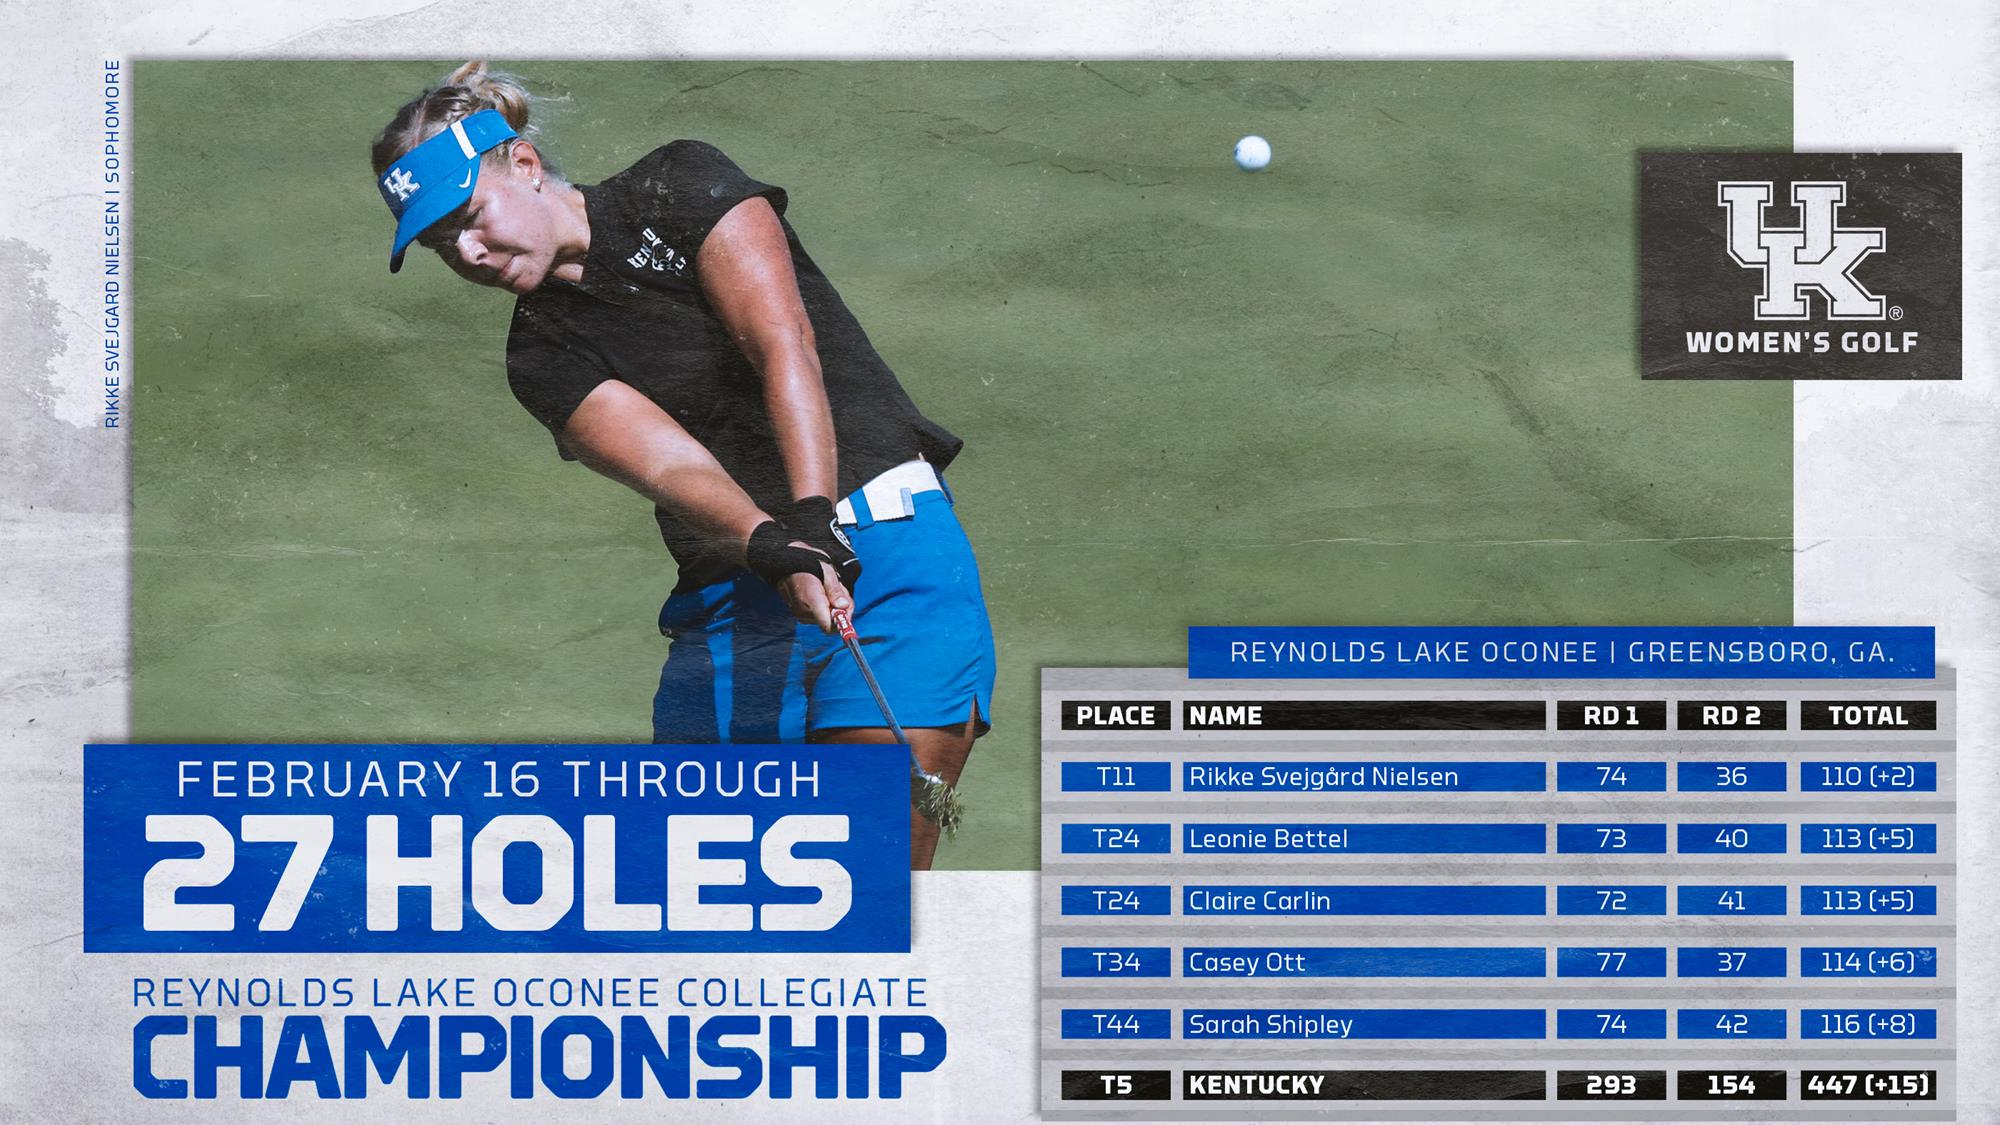 UK Women's Golf in Top Five after Day One of Reynolds Lake Oconee